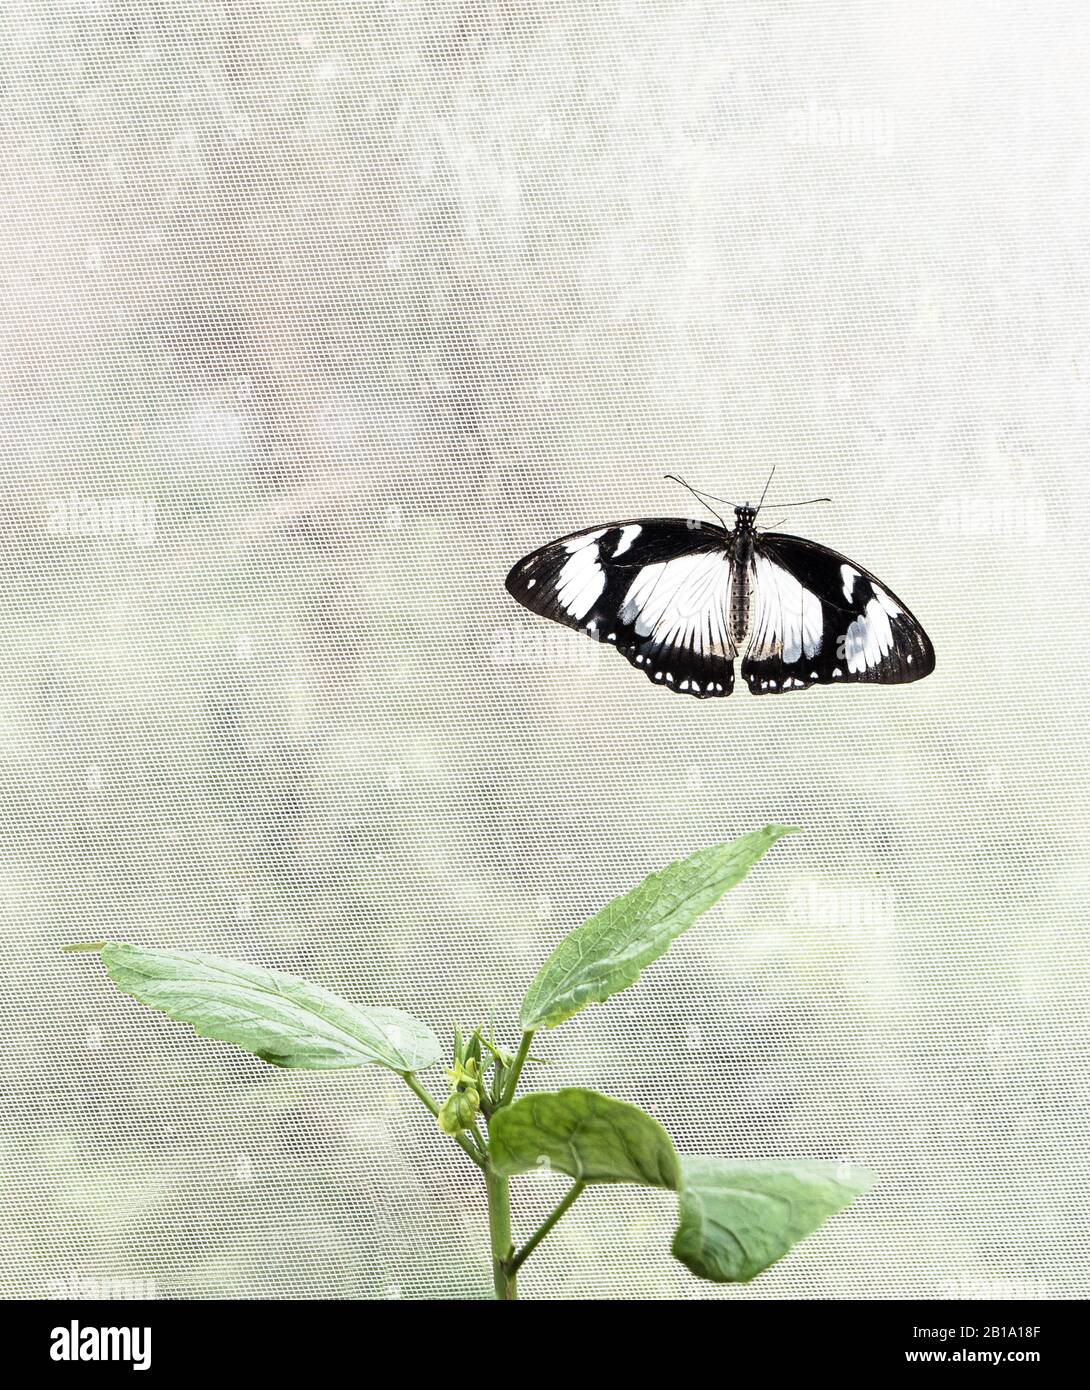 A butterfly with white and black wings resting on netting in the butterfly house at Blenheim Palace. Stock Photo